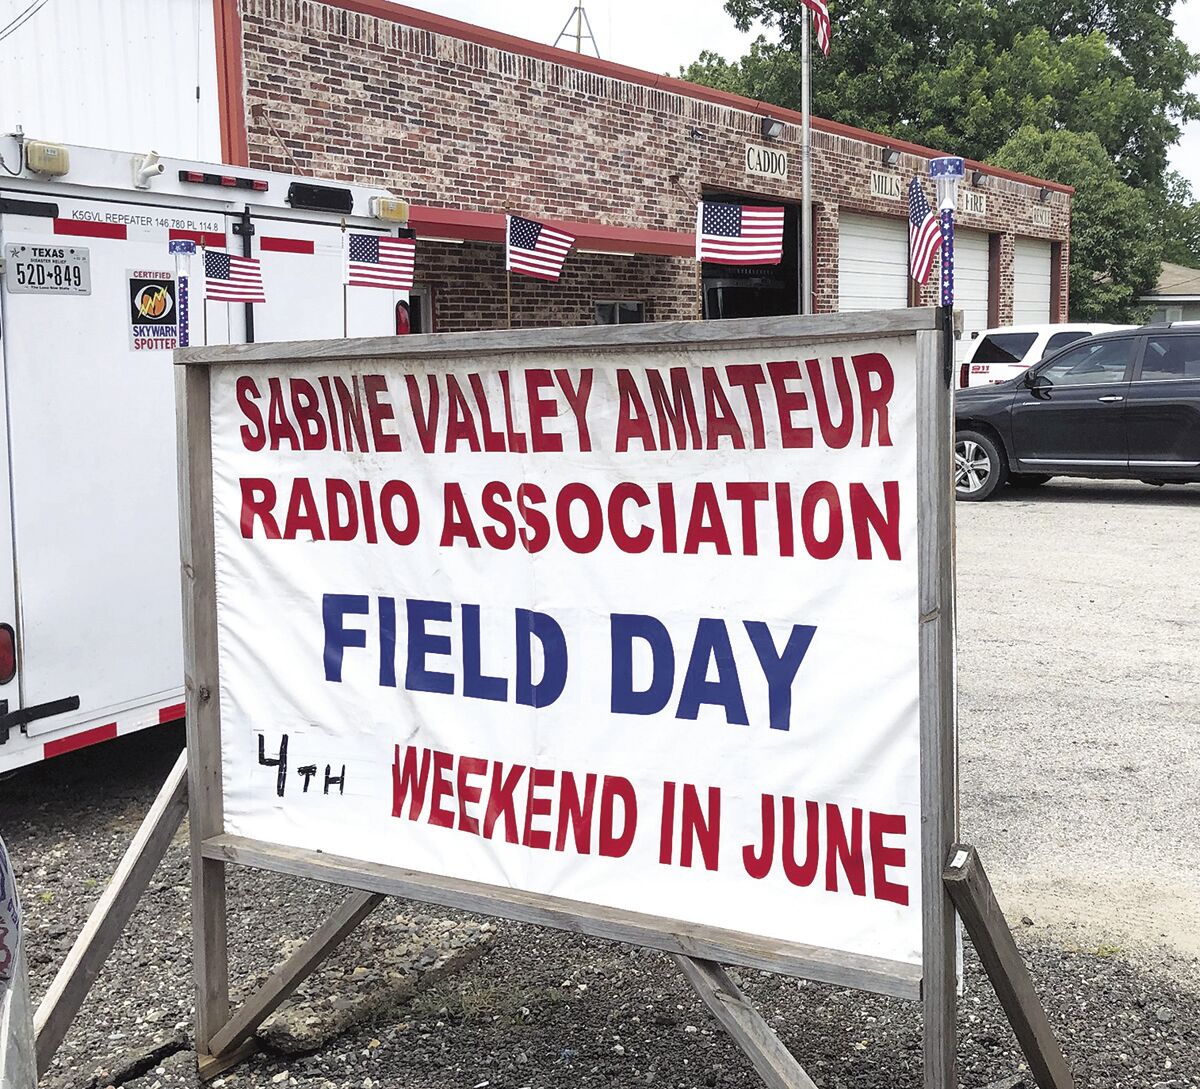 Amateur radio operators plan Field Day participation Local News heraldbanner hq pic